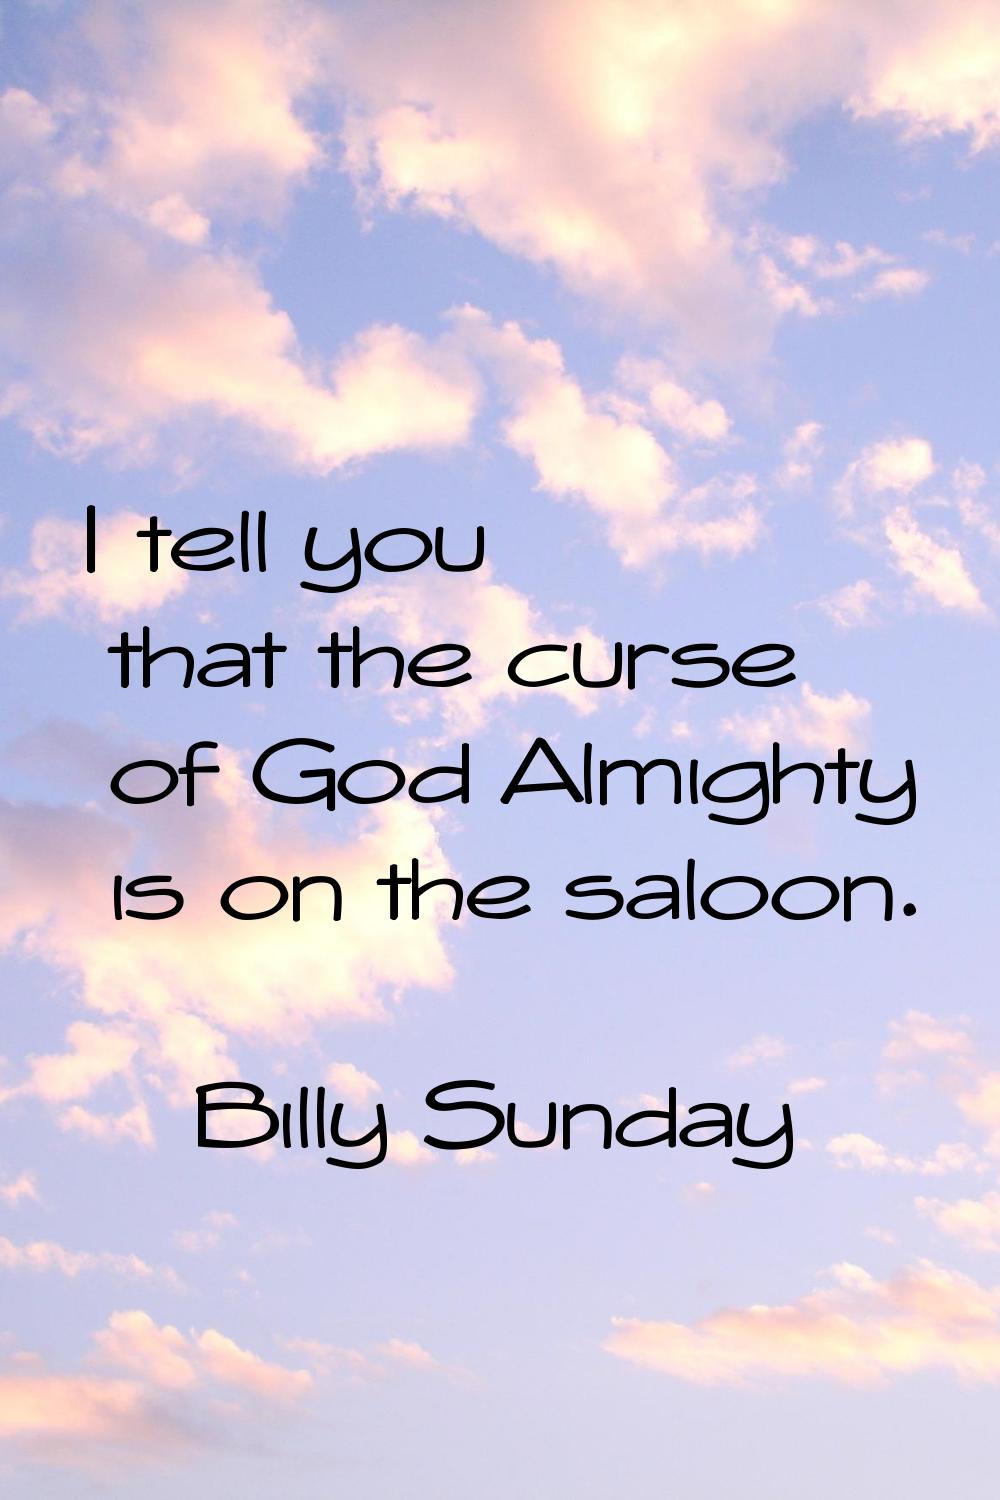 I tell you that the curse of God Almighty is on the saloon.